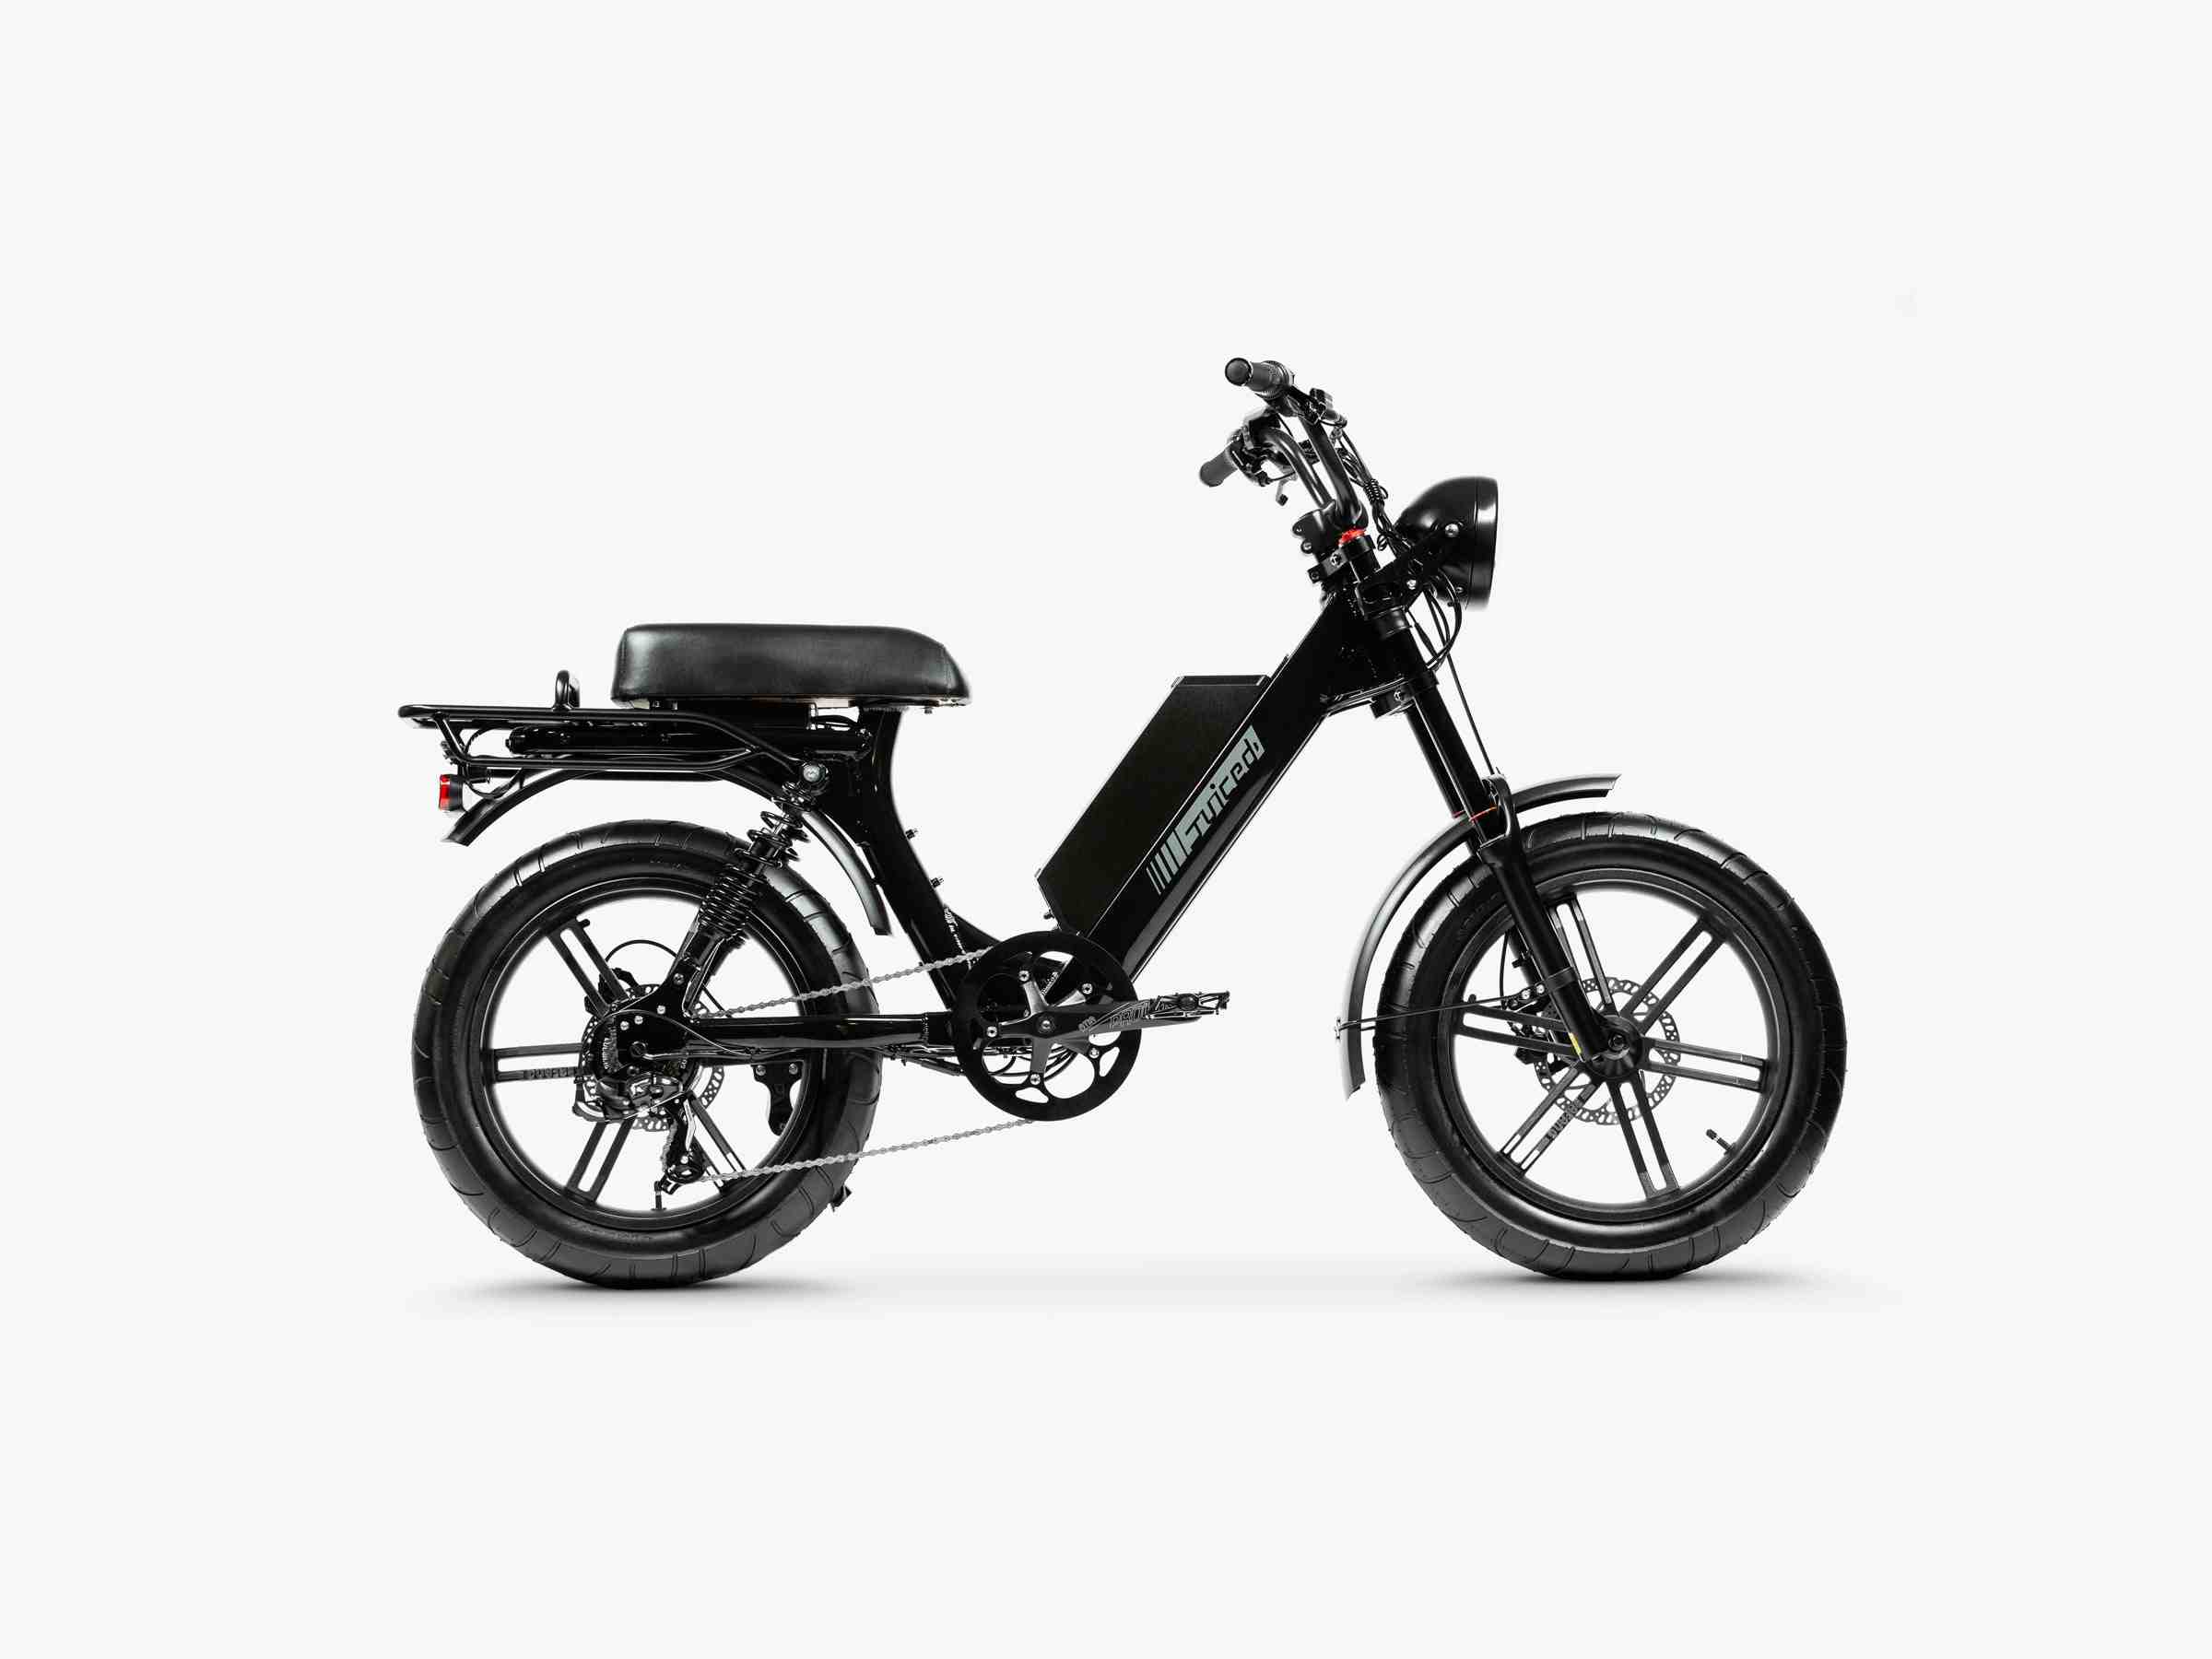 What Licence do you need for an electric motorbike?